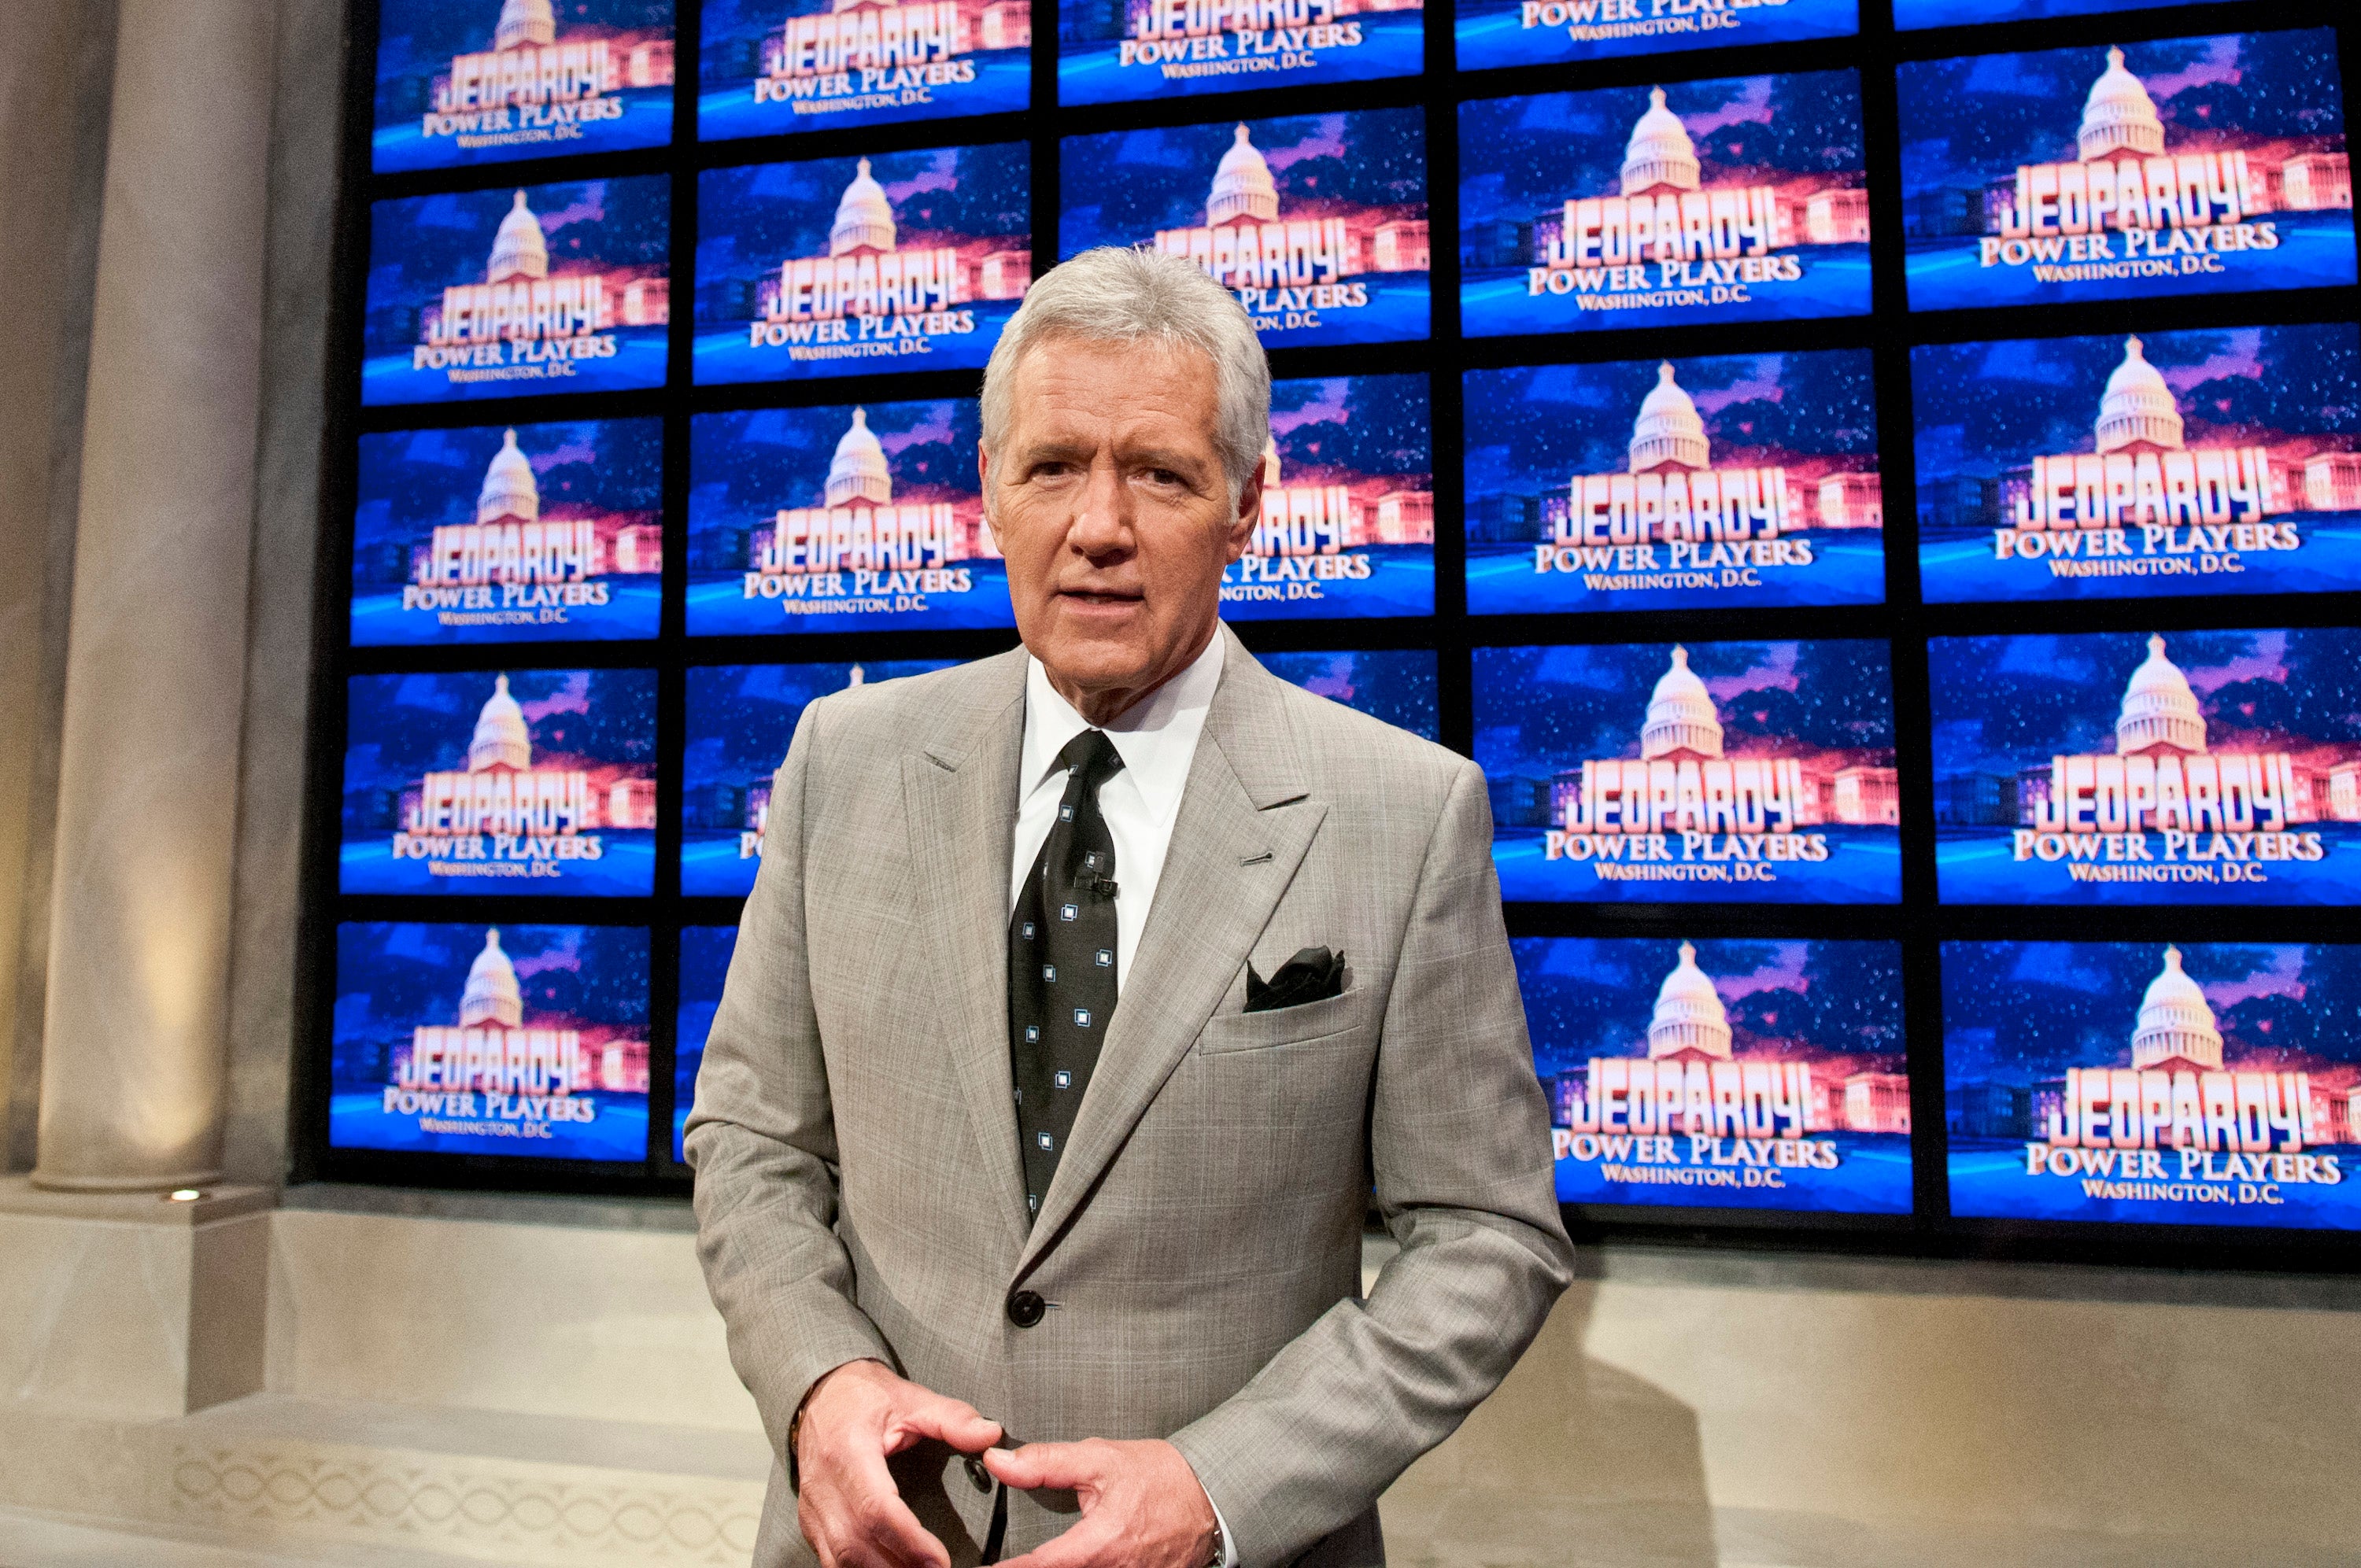 Trebek’s final episode as ‘Jeopardy!' host will air on Christmas Day